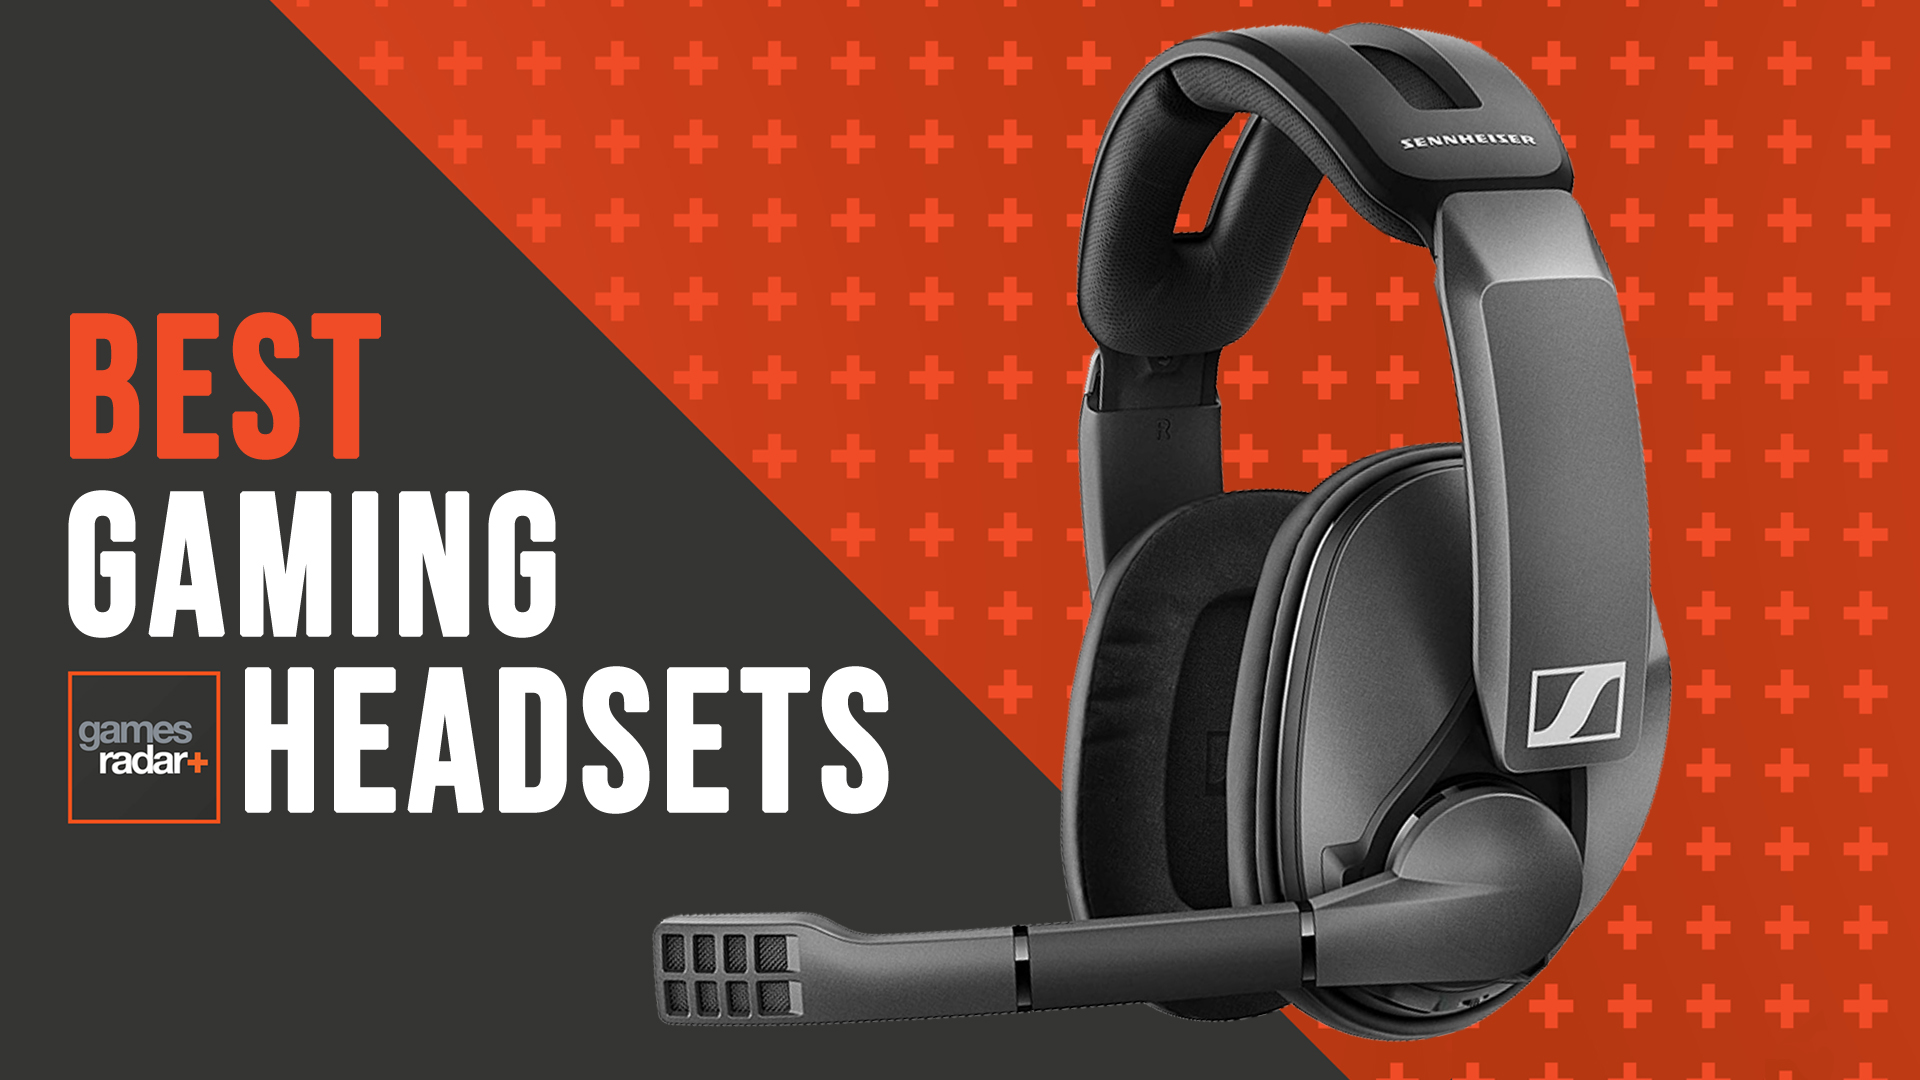 Best Gaming Headset 2021 The Best Gaming Headsets 2021 Pick Your Gaming Audio Companion From The Absolute Top Headsets Gamesradar